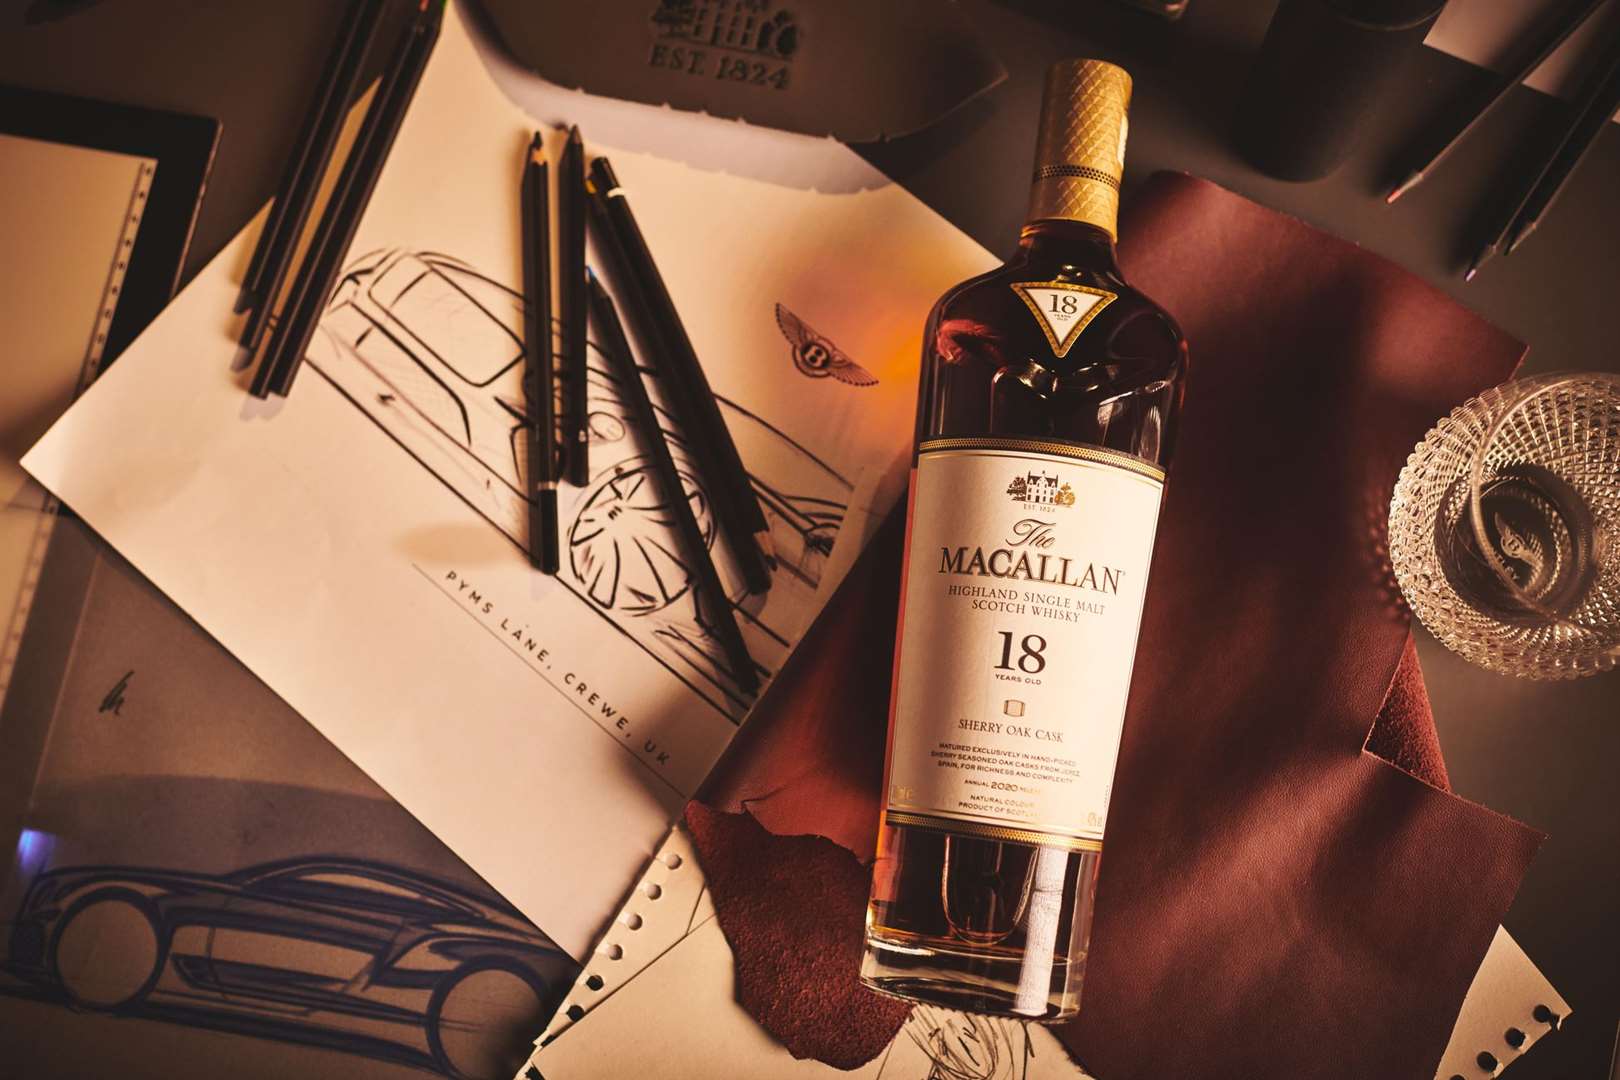 Macallan and Bentley have teamed up to form a new global brand partnership.